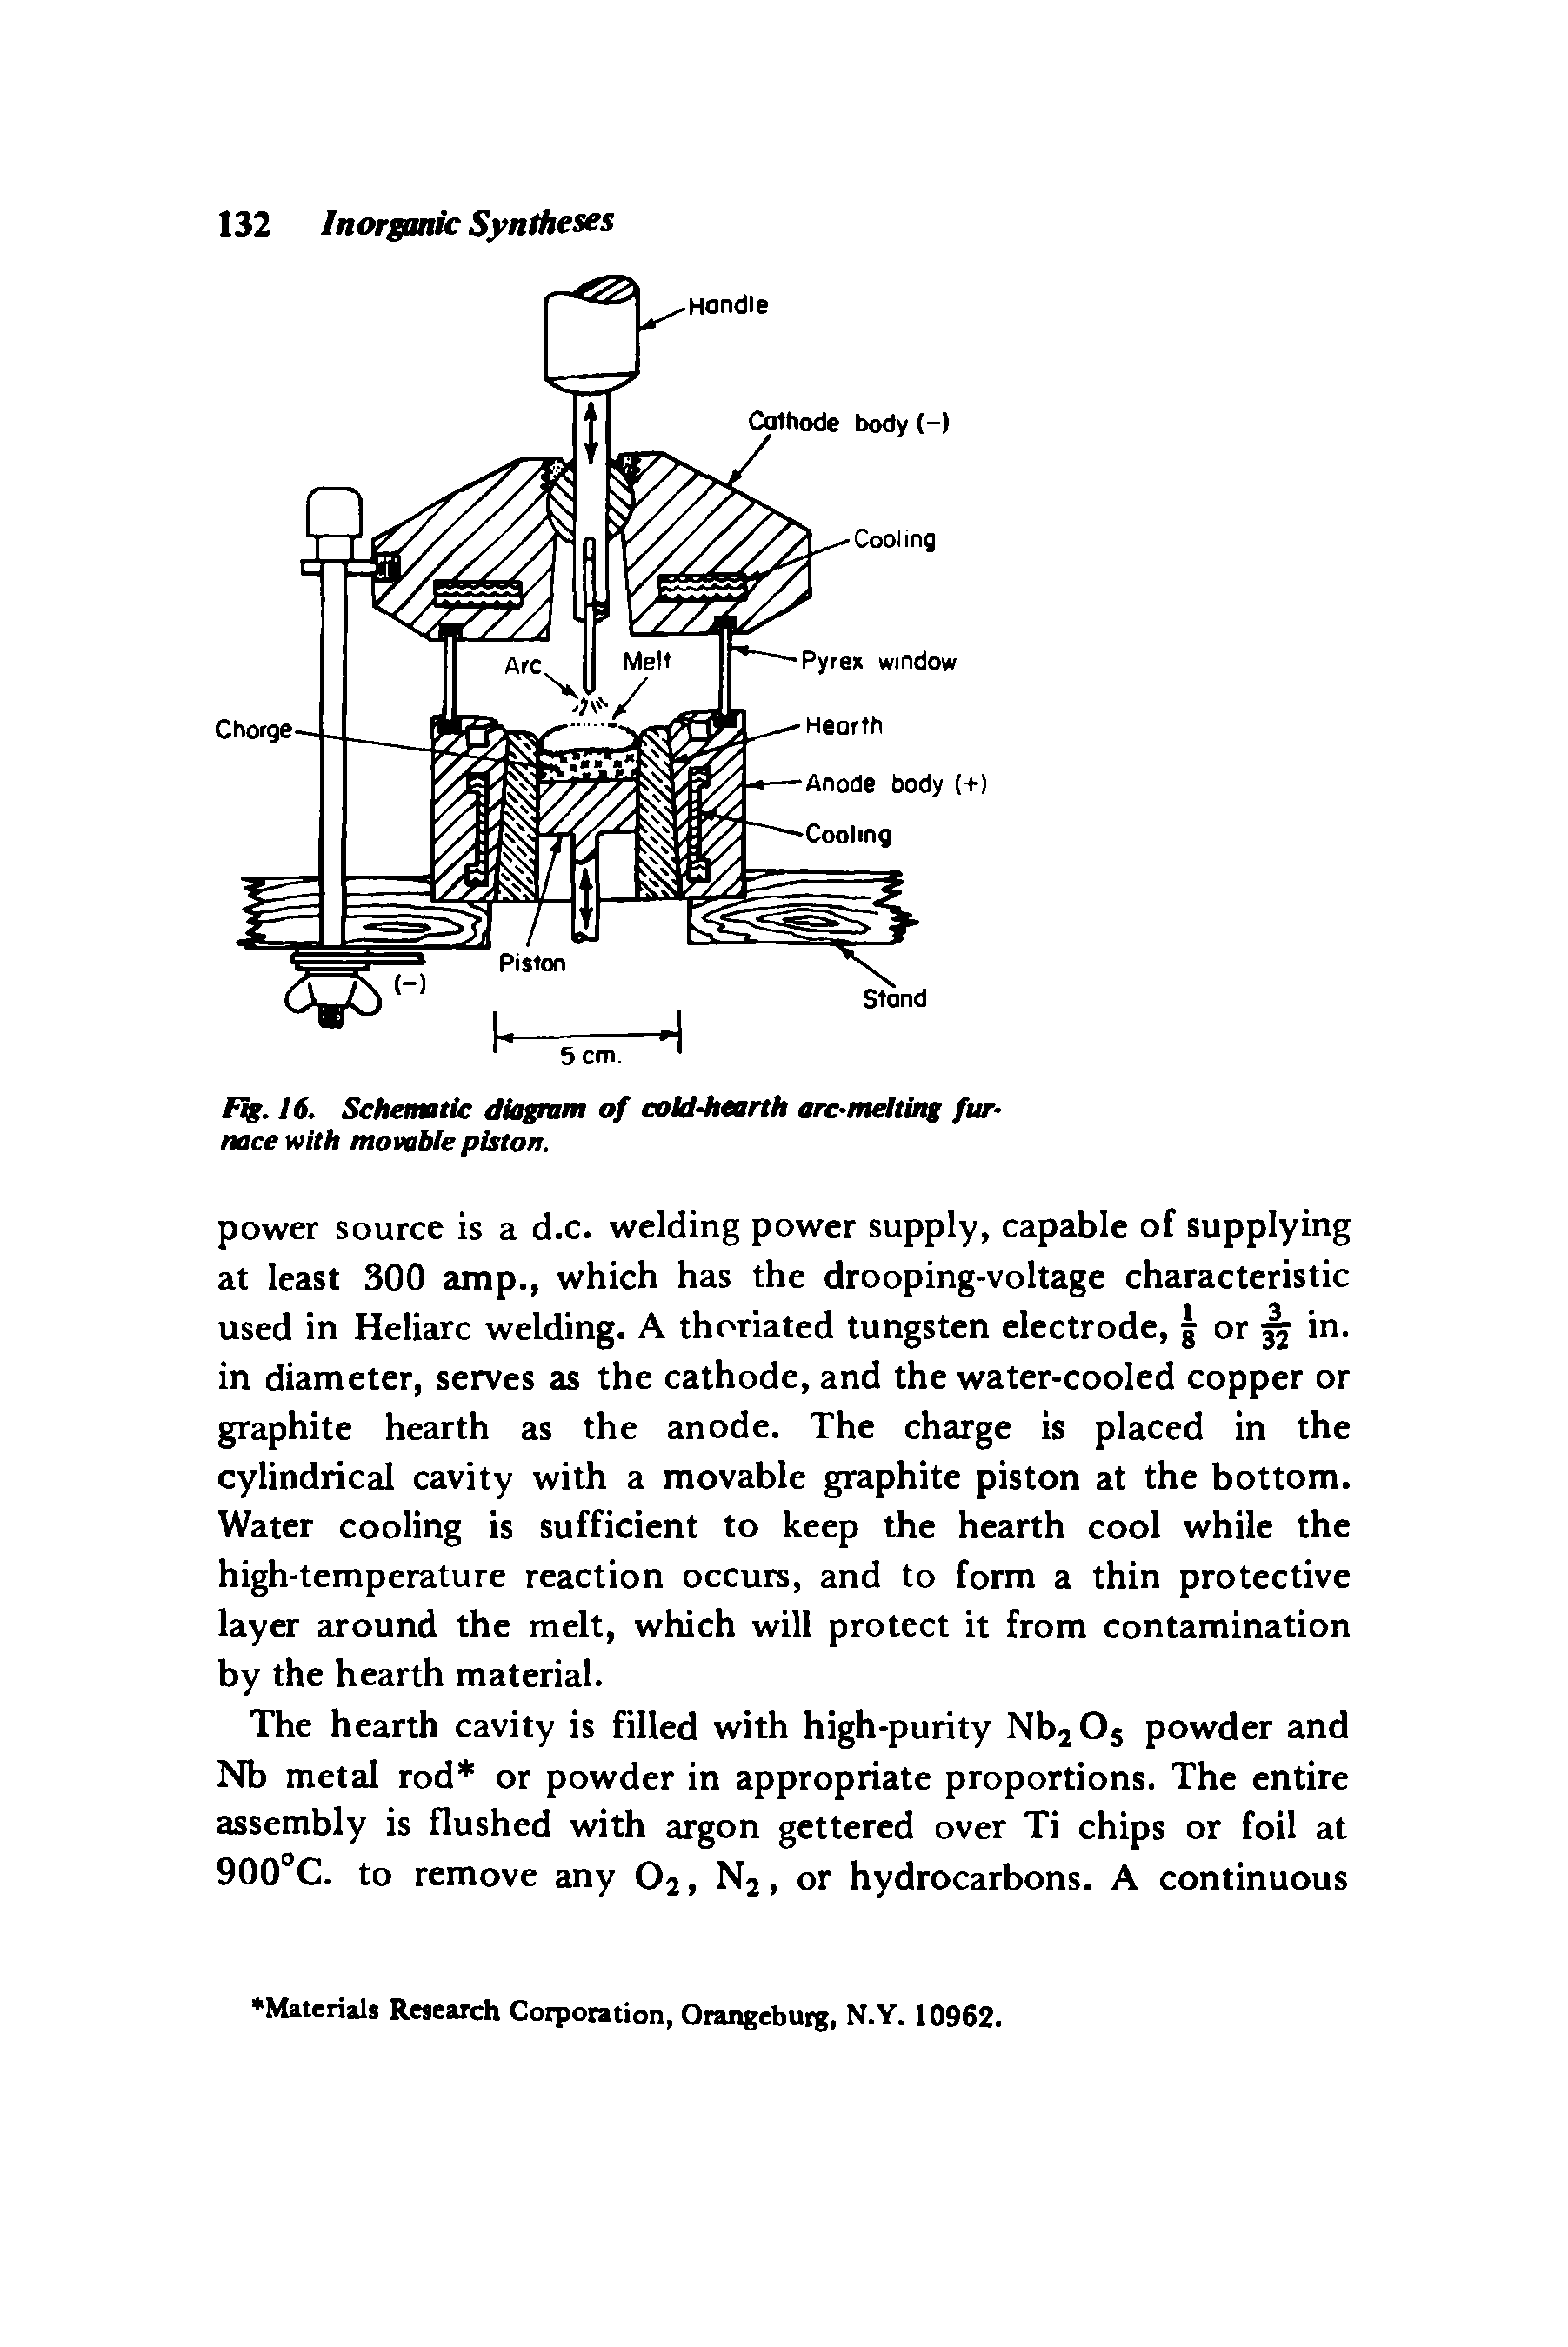 Fig. 16. Schematic diagram of cold-hearth arc-melting furnace with movable piston.